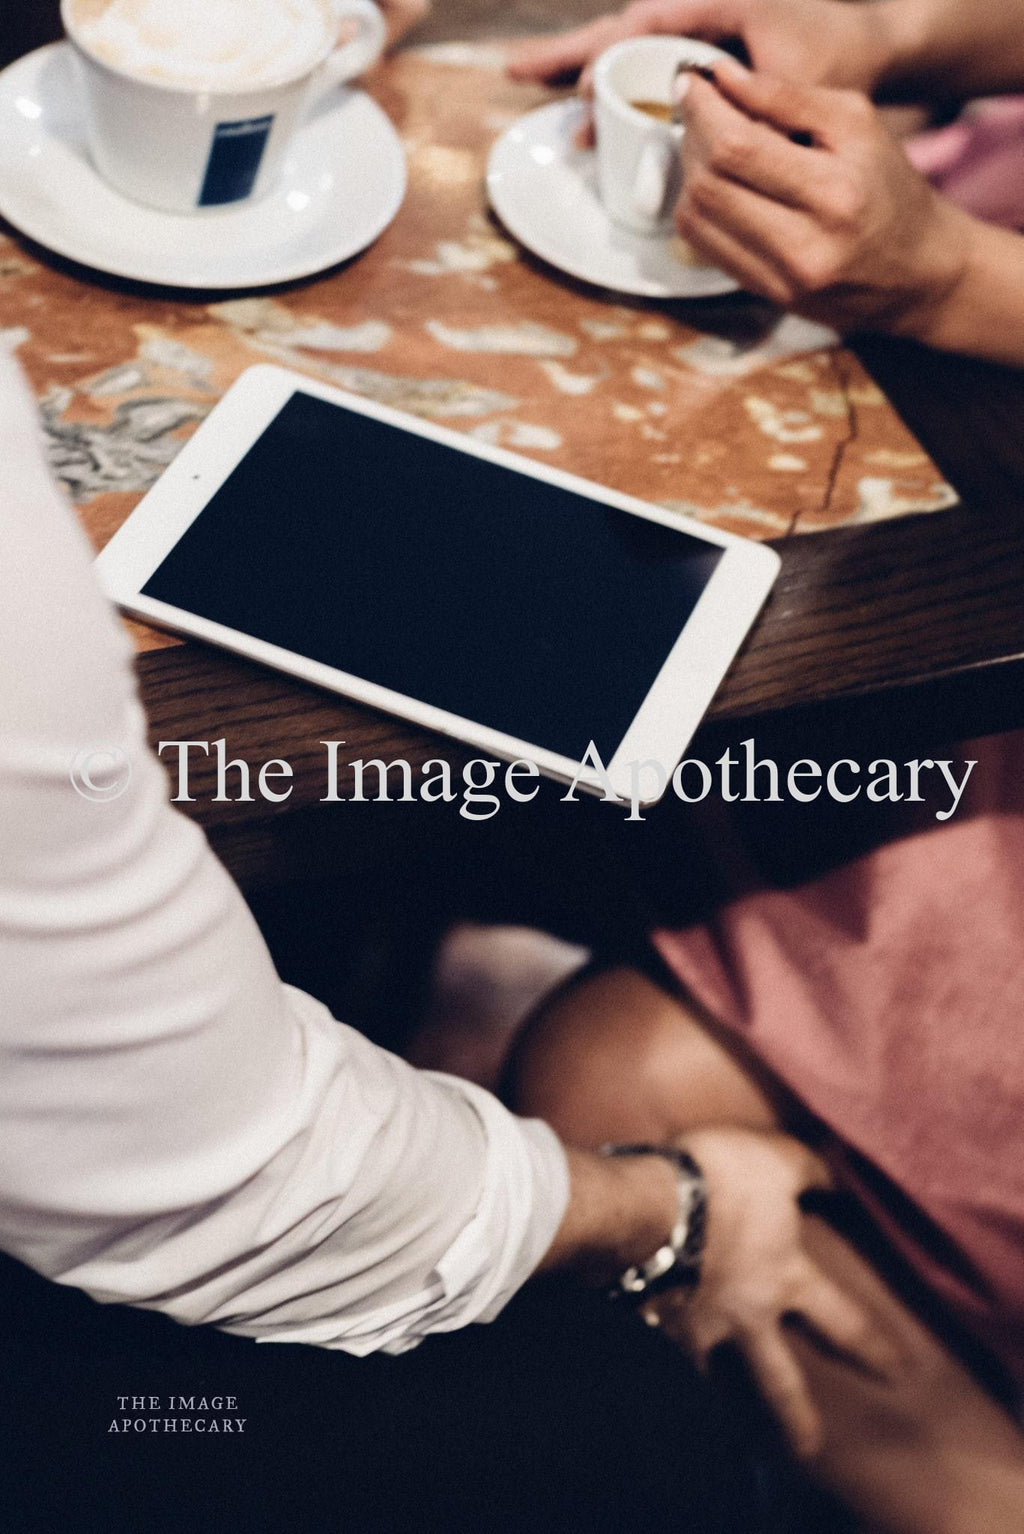 TheImageApothecary-302 - Stock Photography by The Image Apothecary